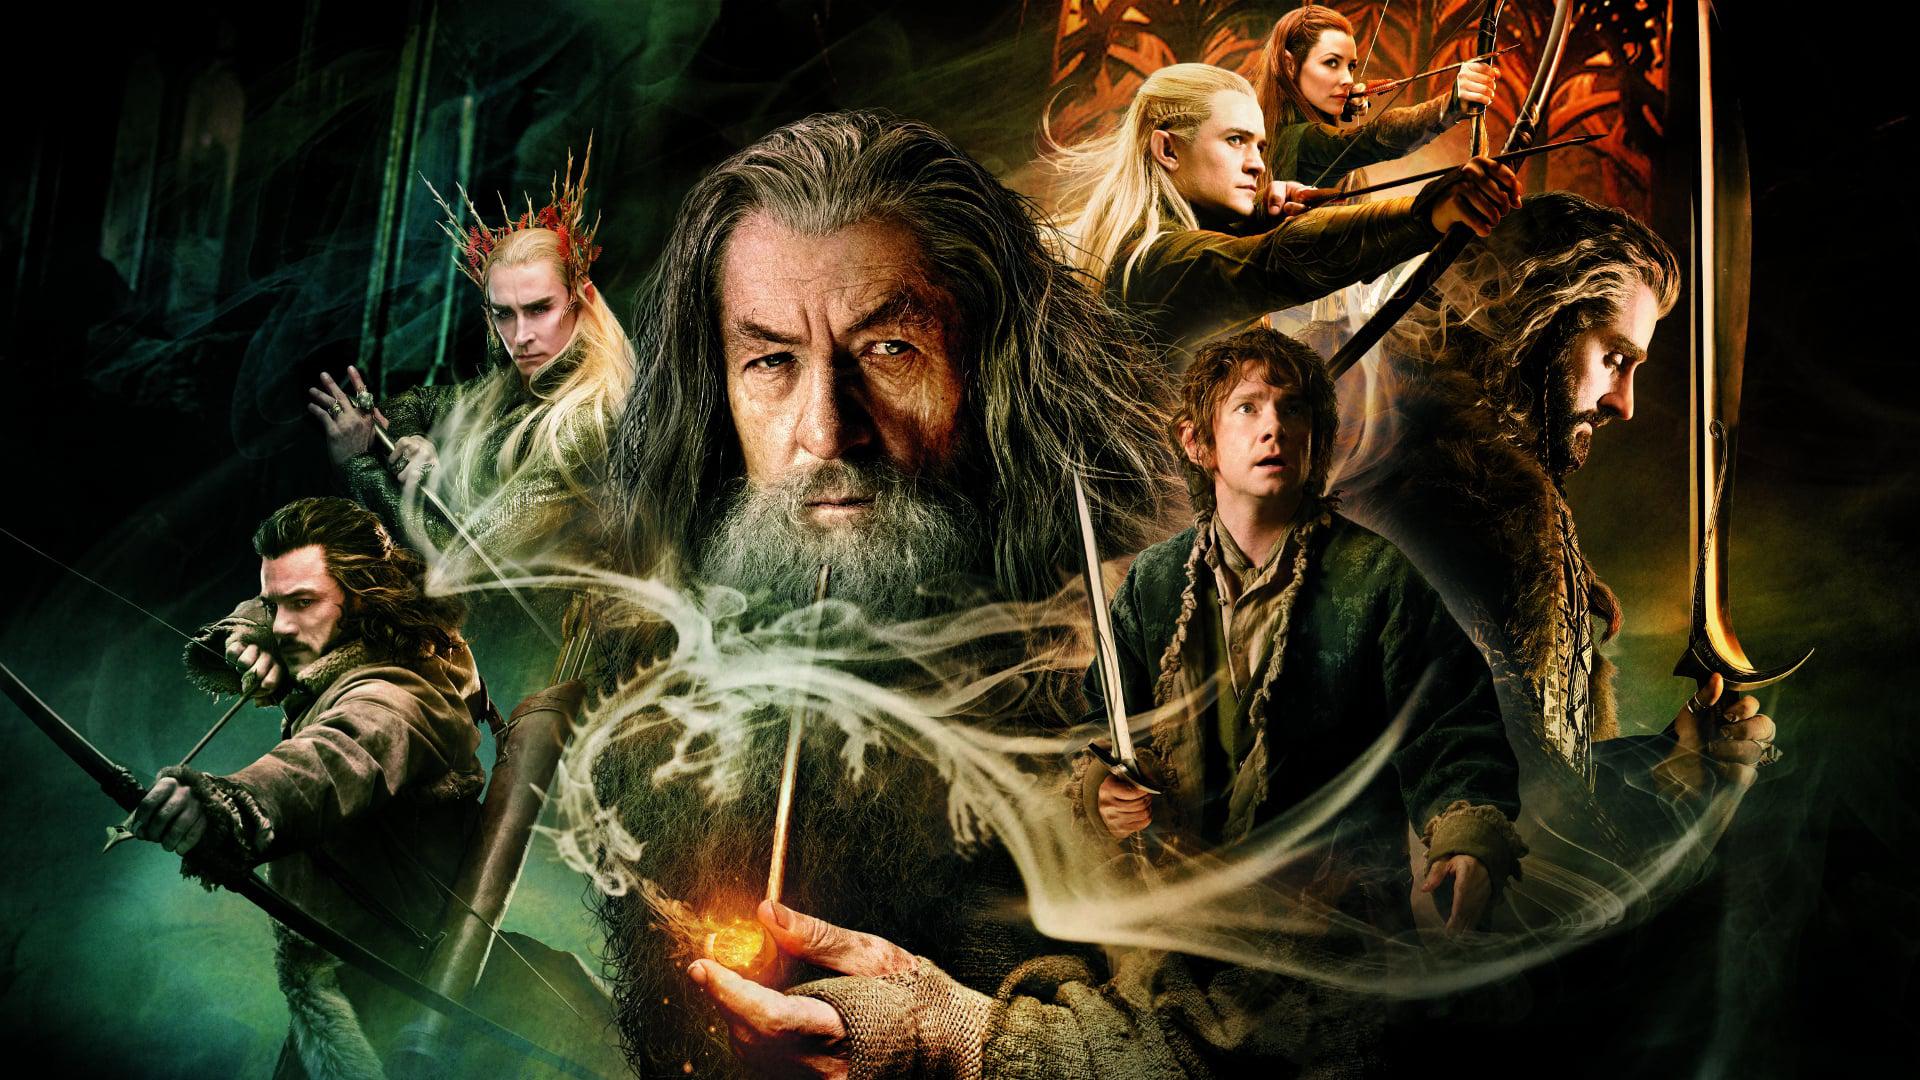 Backdrop Image for The Hobbit: The Desolation of Smaug